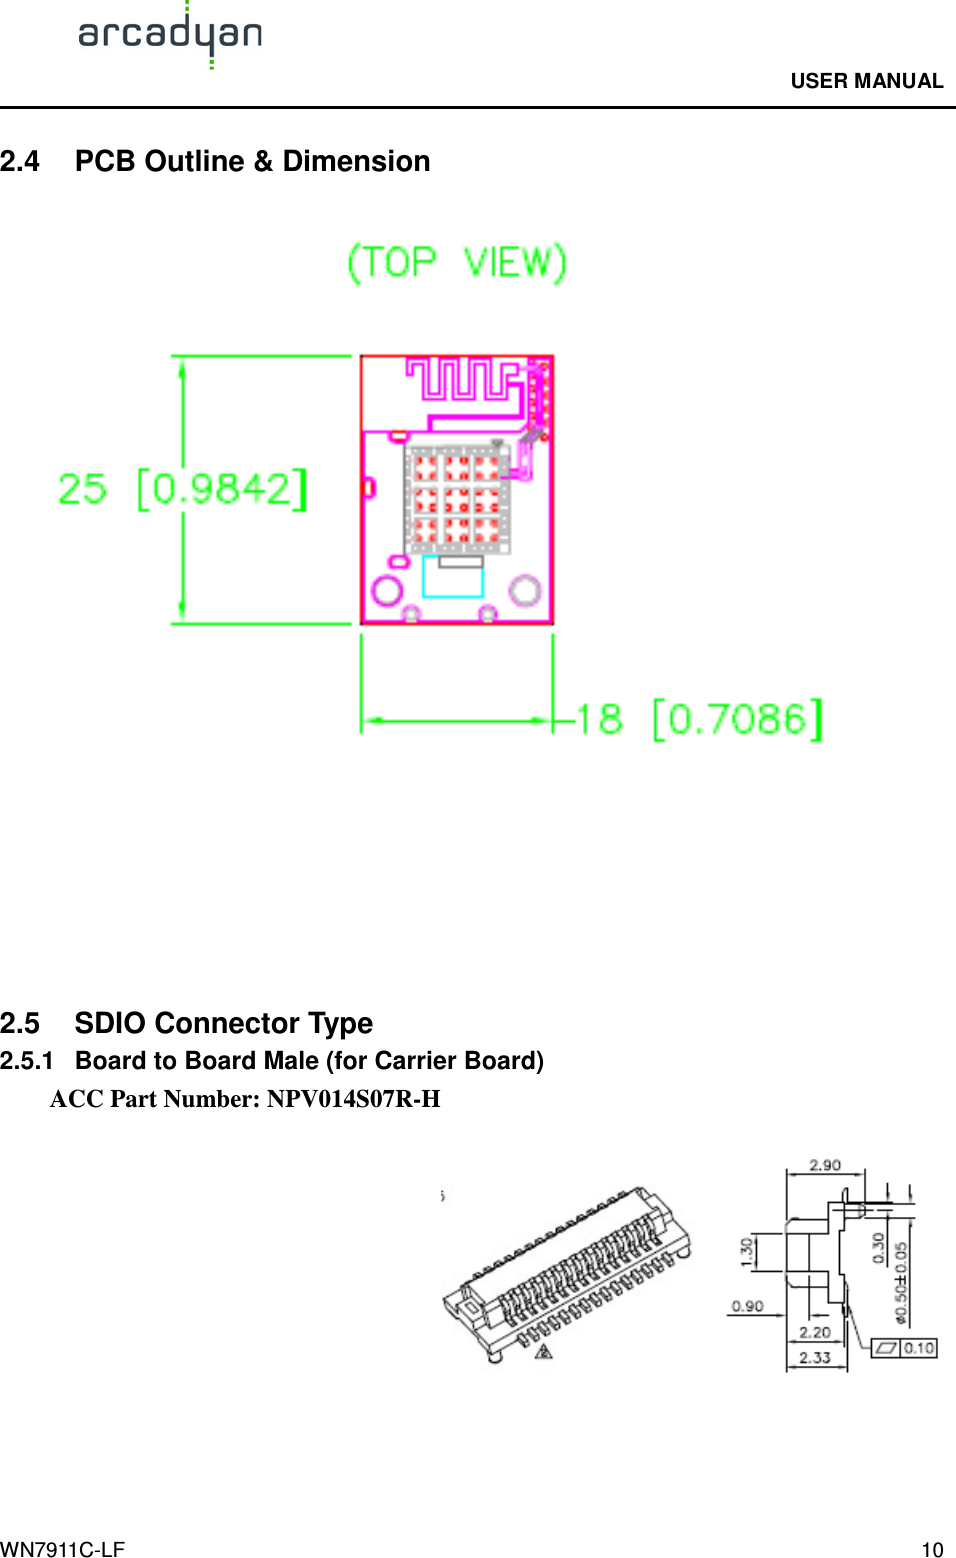                                              USER MANUAL                                              WN7911C-LF  10 2.4  PCB Outline &amp; Dimension   2.5  SDIO Connector Type 2.5.1  Board to Board Male (for Carrier Board) ACC Part Number: NPV014S07R-H     